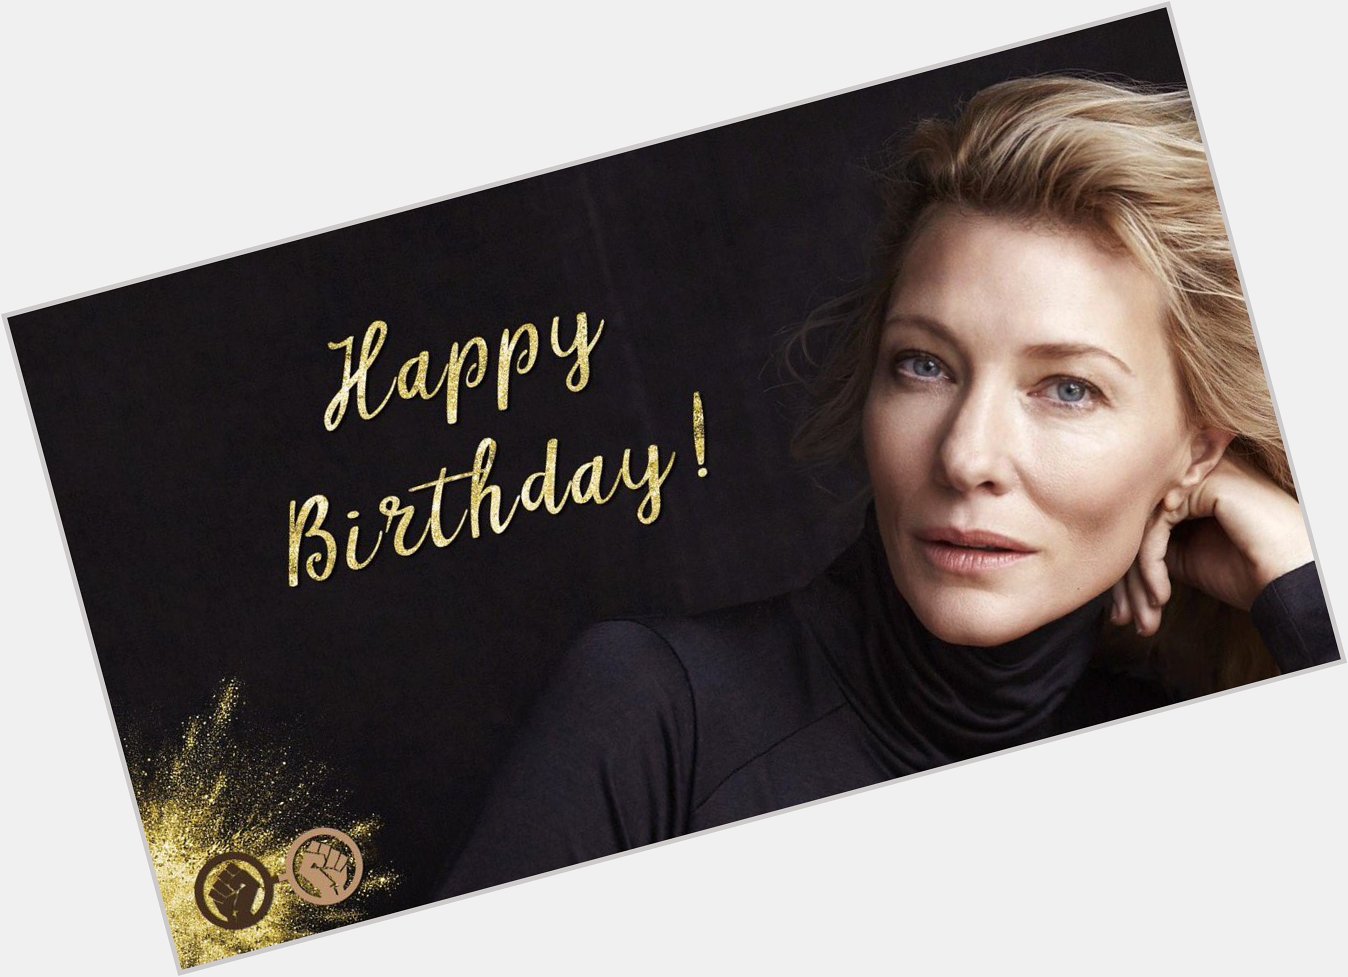 Wishing the wonderful Cate Blanchett a very happy birthday! The talented actress turns 49 today! 